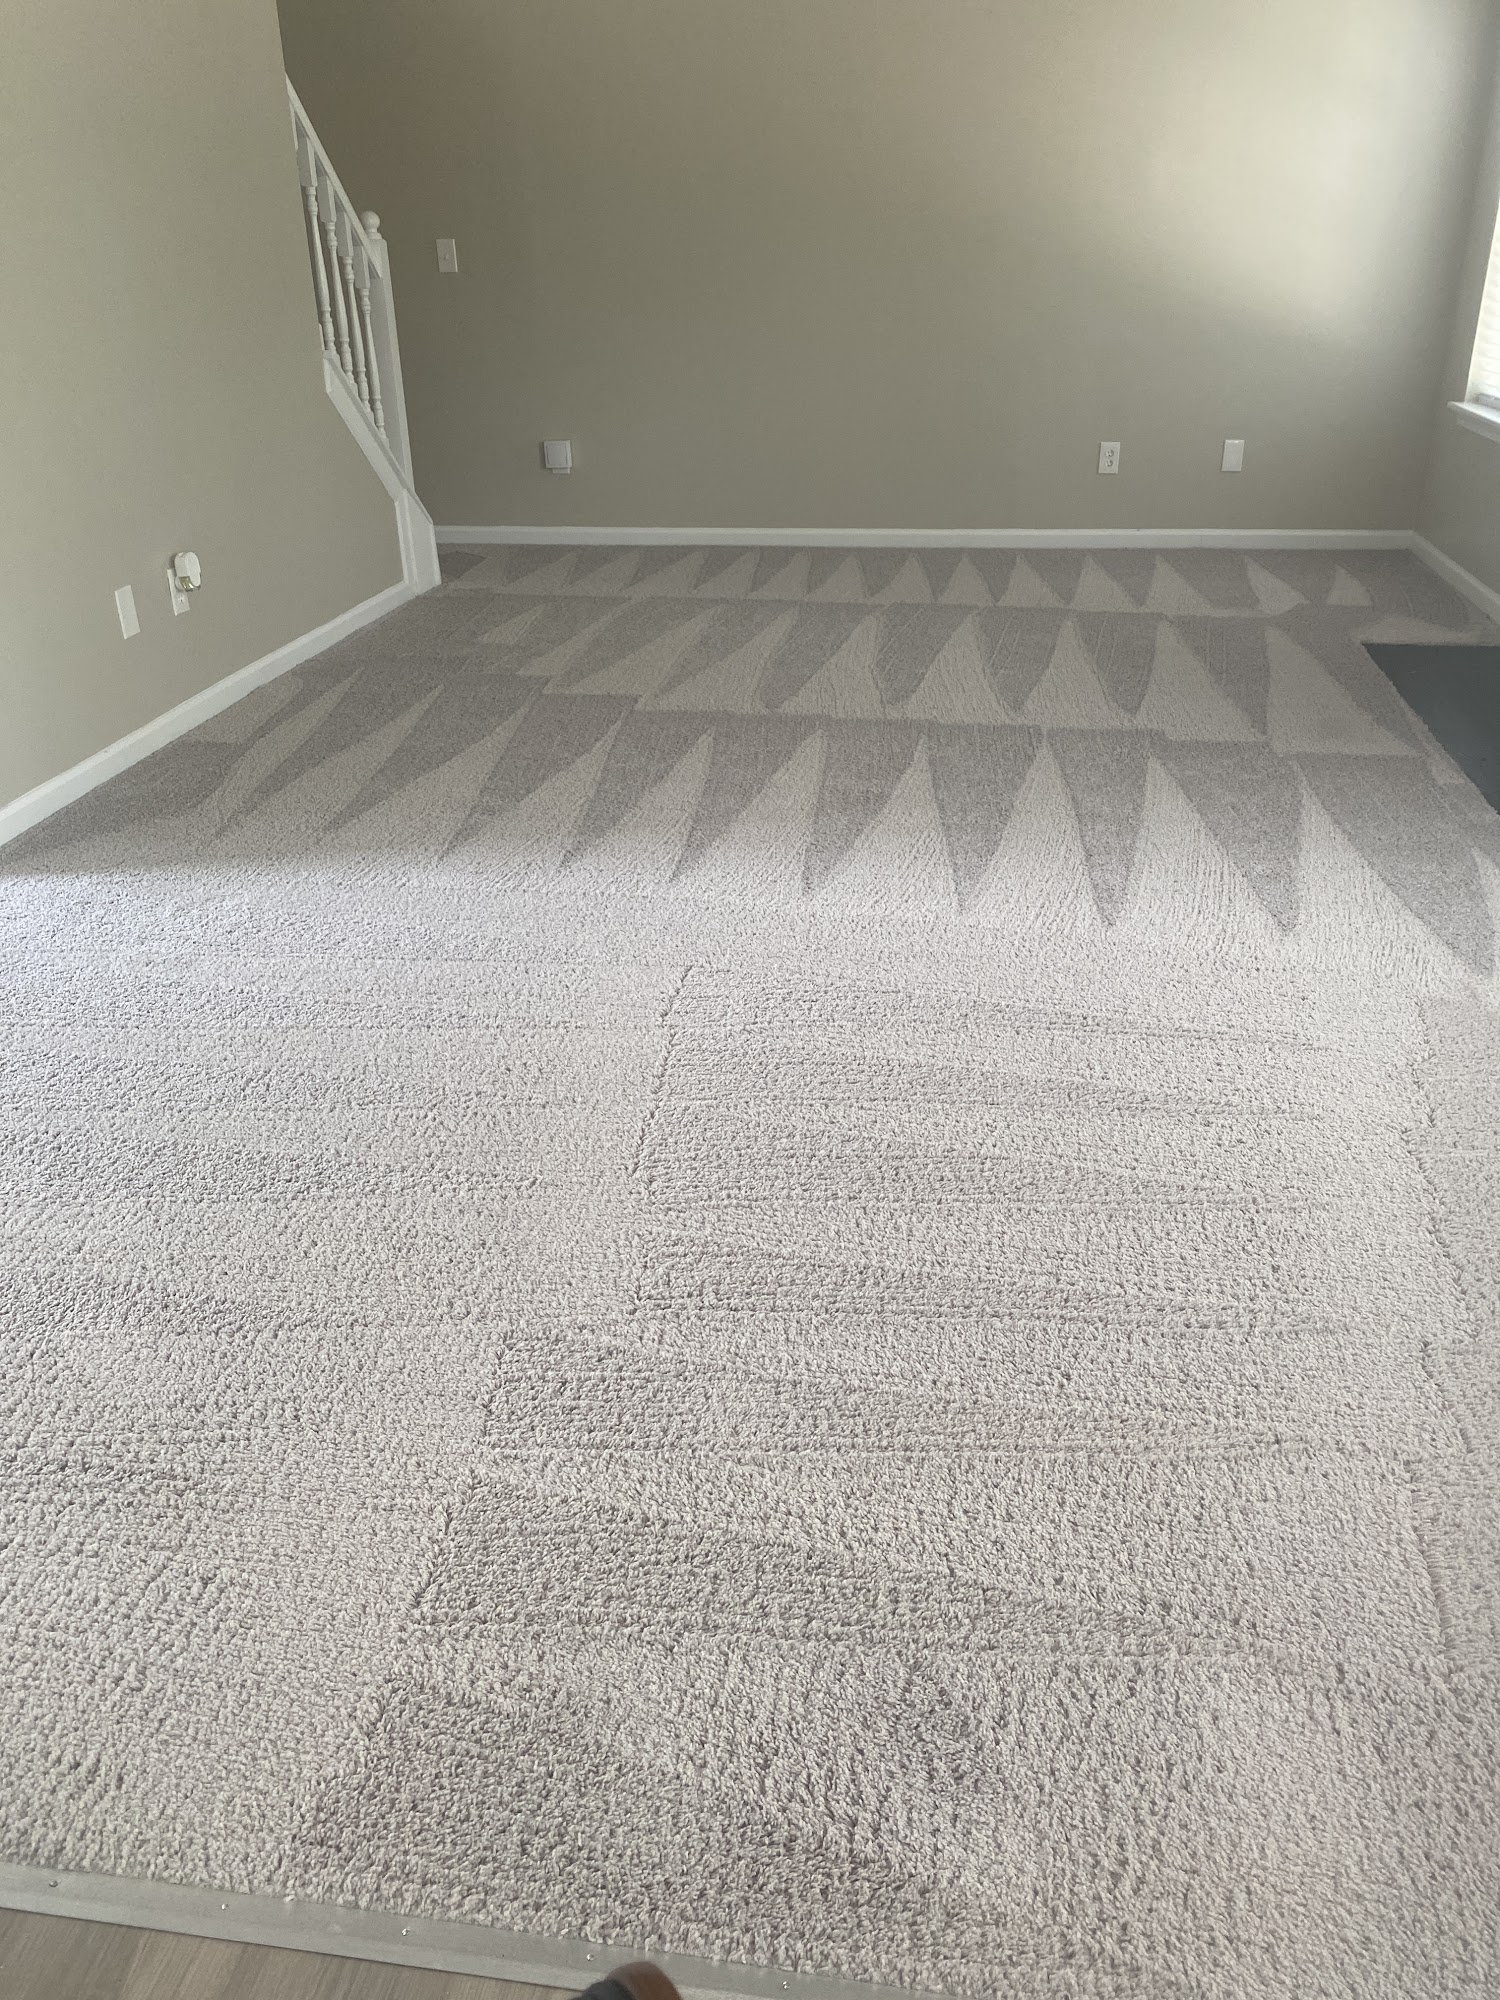 Carpet Cleaning @ Its BEST!